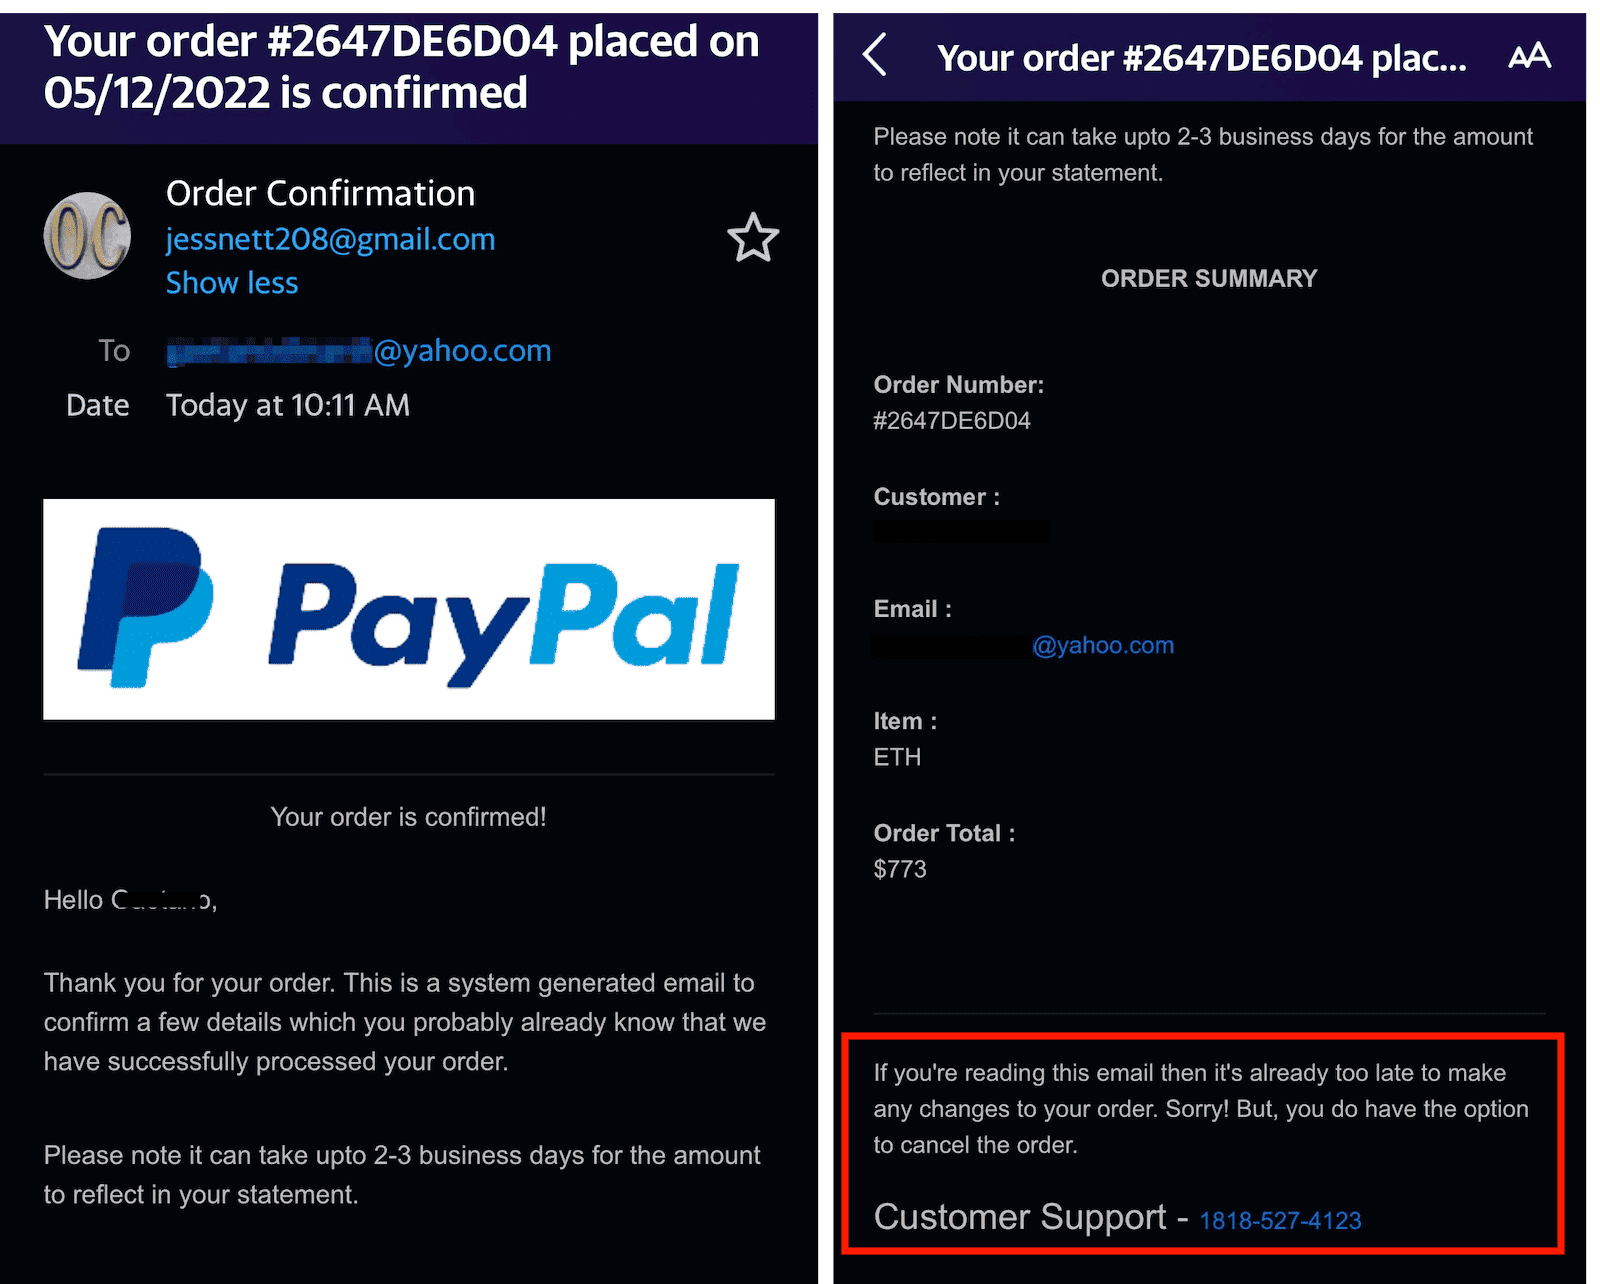 Did you get an unexpected invoice from PayPal? It’s a scam